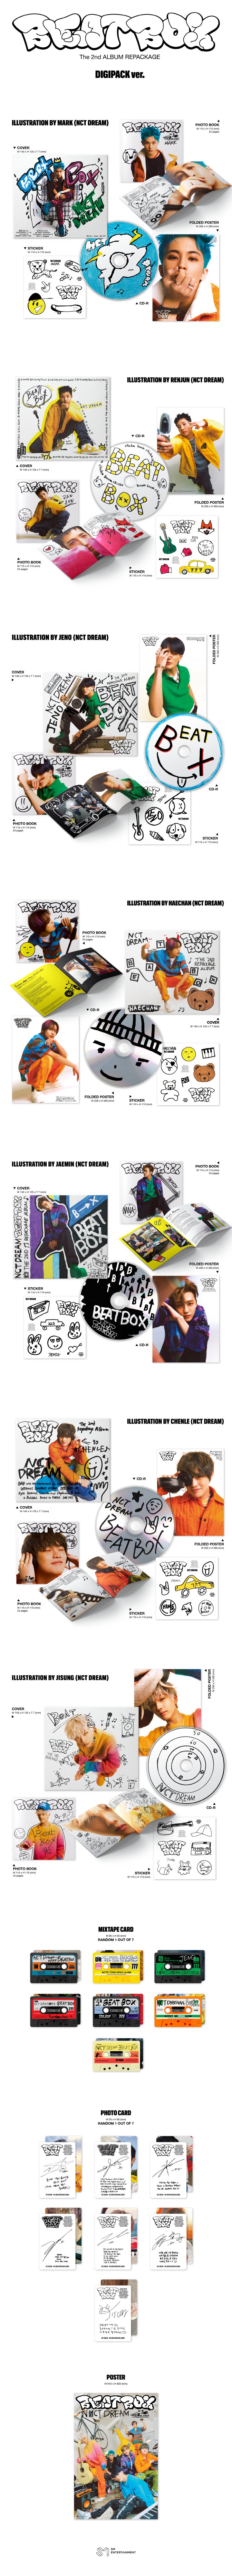 NCT DREAM 2nd regular repackage 'Beatbox' released on May 30th! 4 additional new songs including the title song 'Beatbox' ...